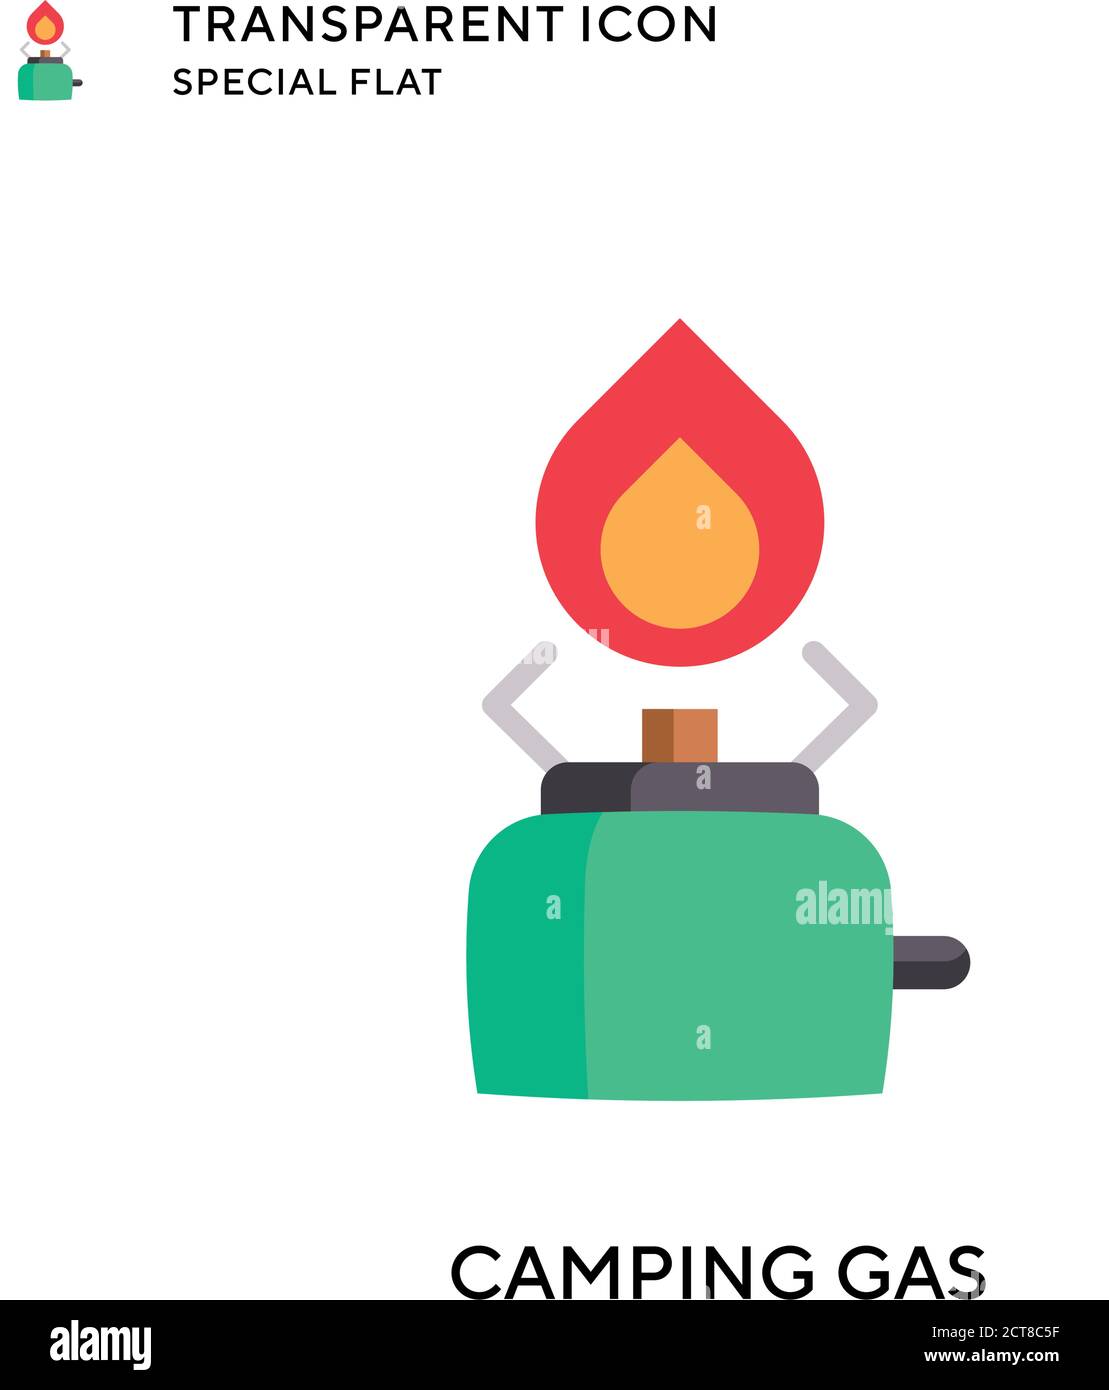 Camping gas vector icon. Flat style illustration. EPS 10 vector. Stock Vector